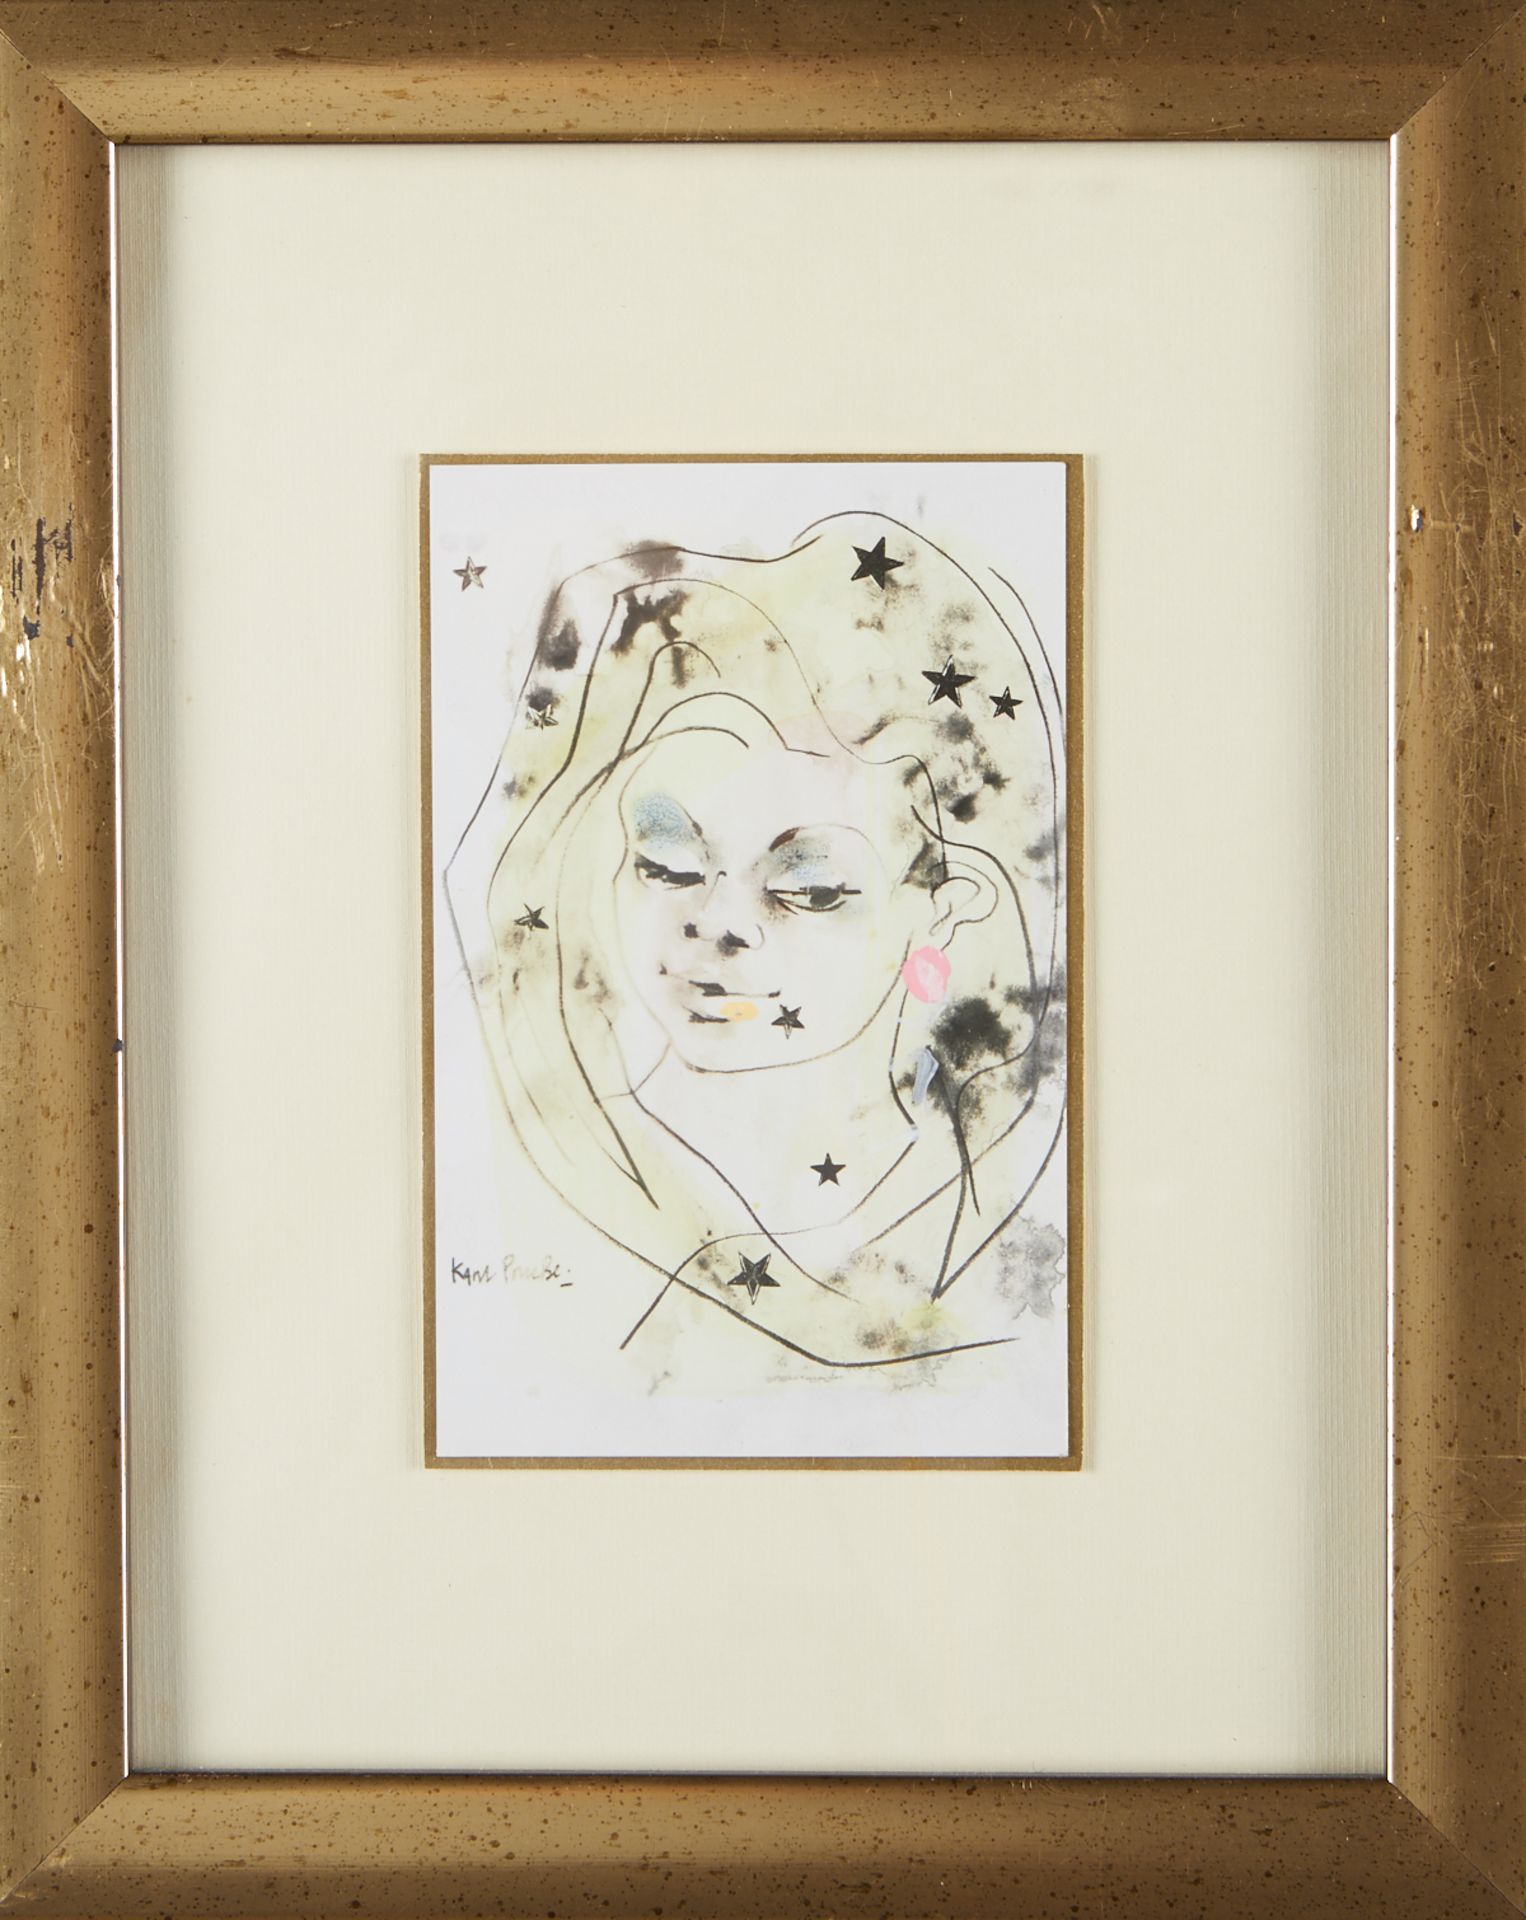 Karl Priebe Lady with Stars Painting on Print - Image 2 of 4